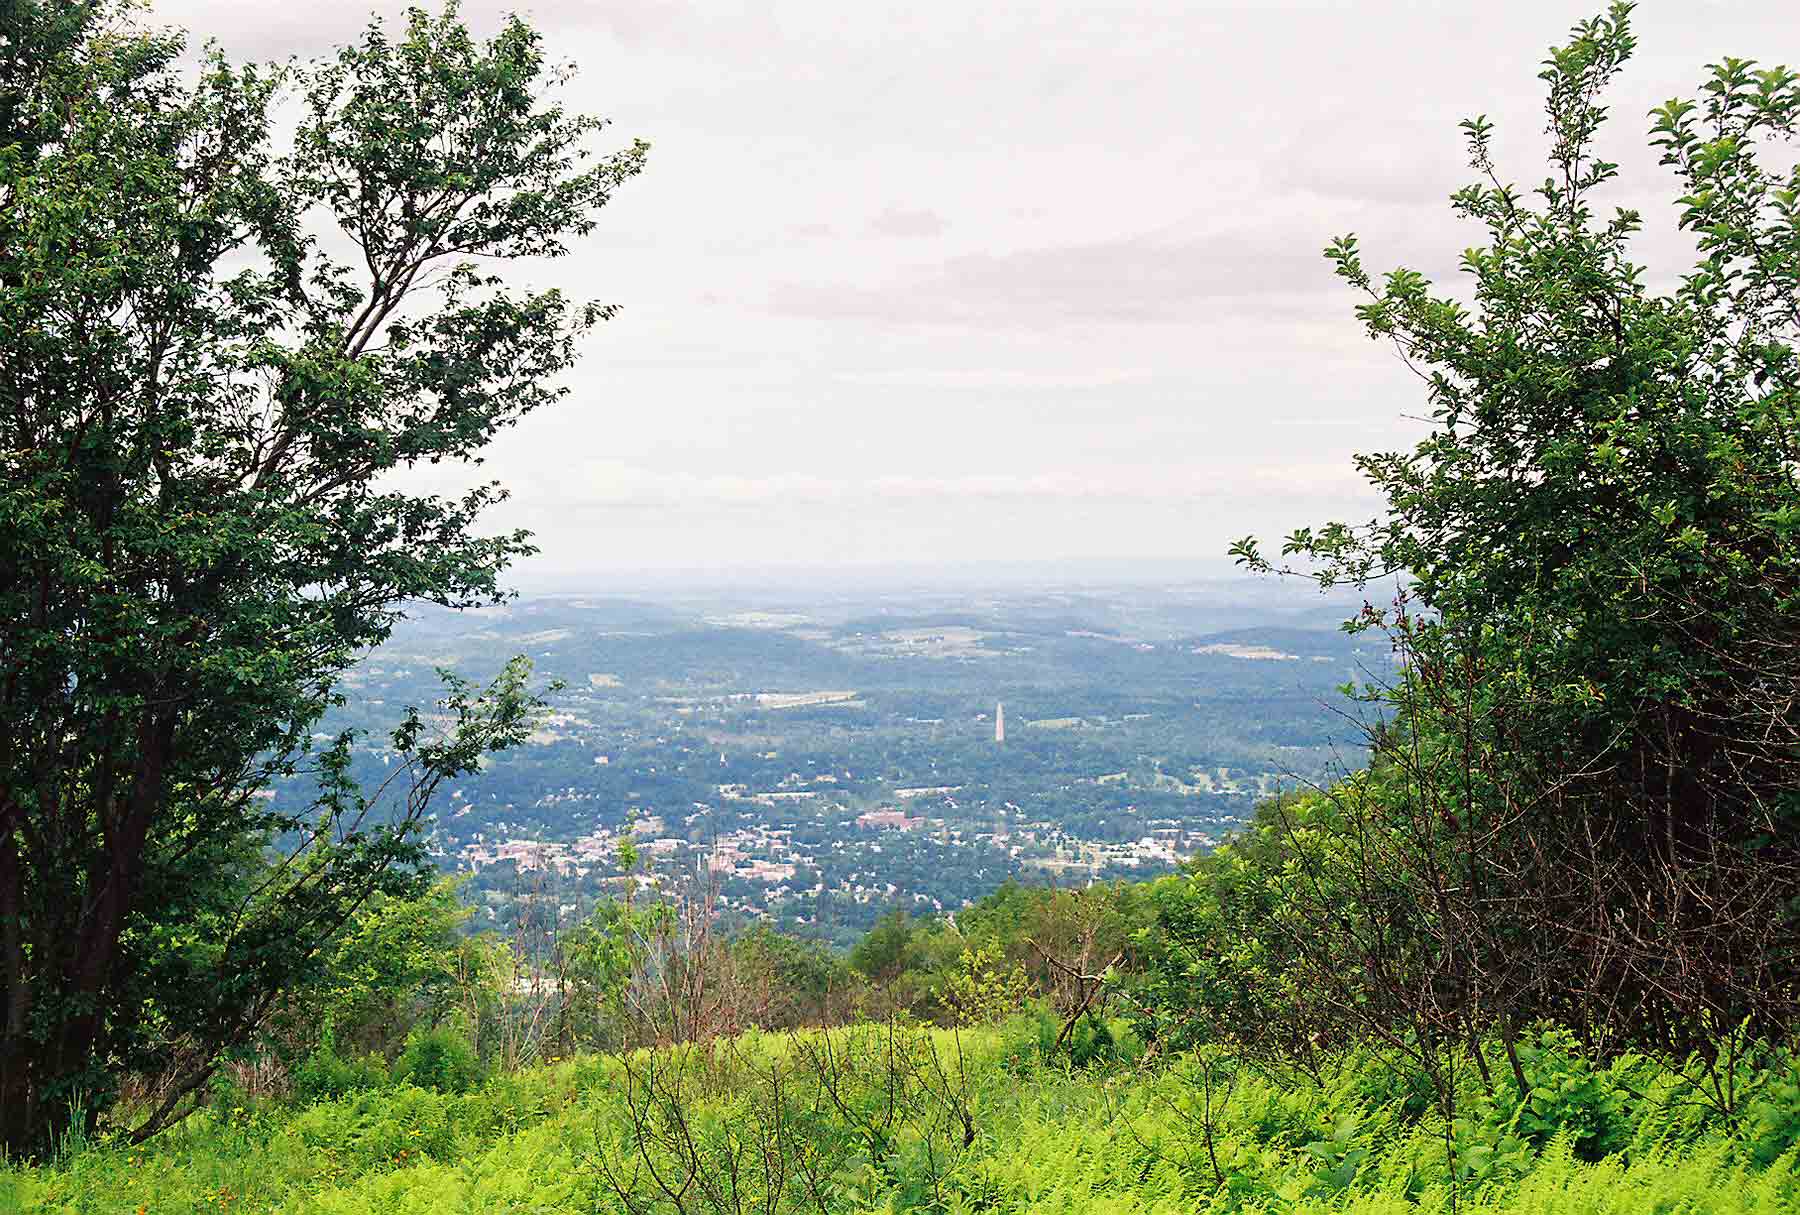 mm 1.8 - View of Bennington from Harmon Hill.  Courtesy dlcul@conncoll.edu